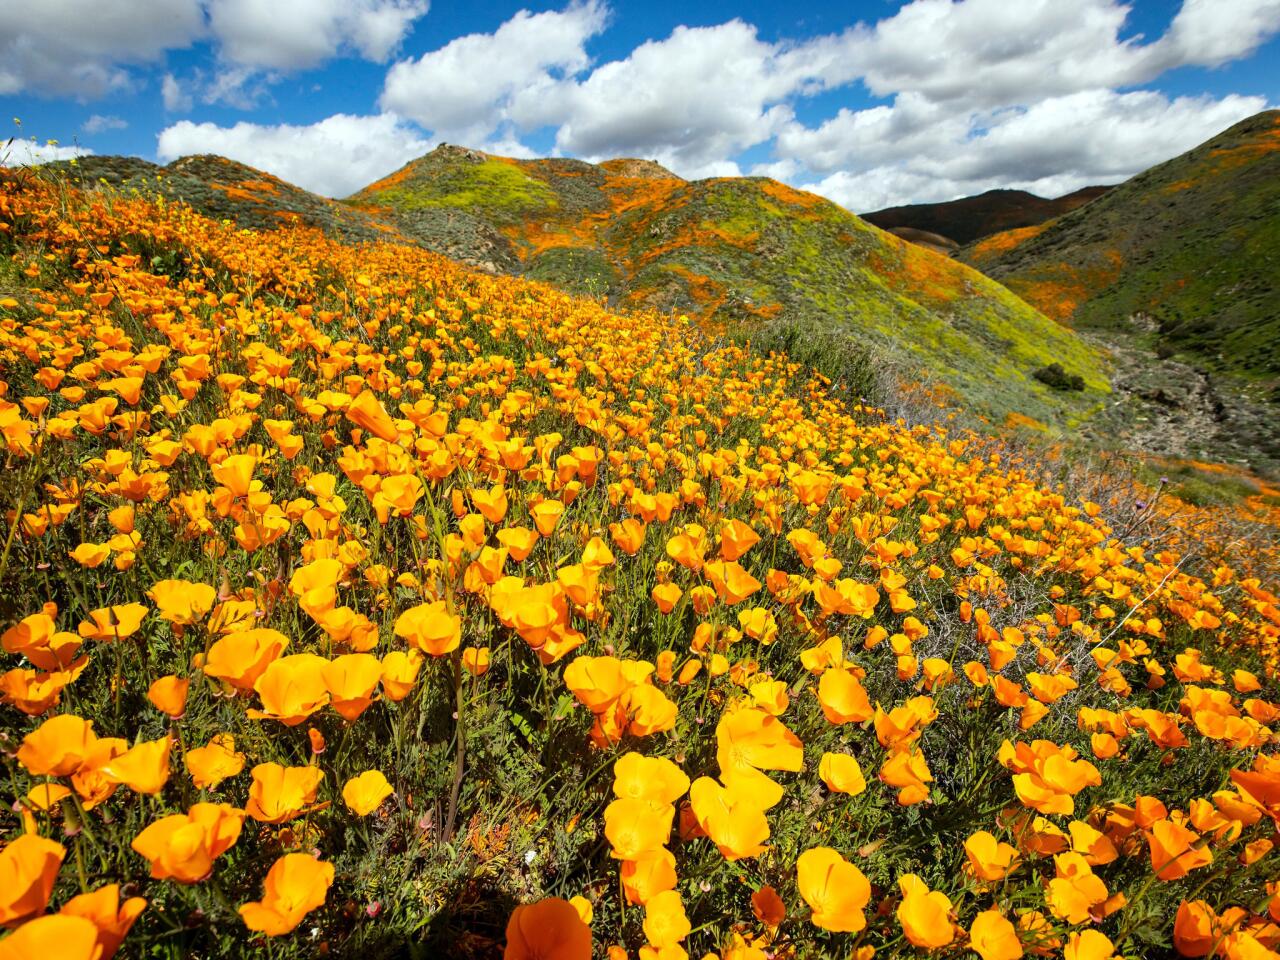 Poppies bloom on the slopes of Walker Canyon near Lake Elsinore.